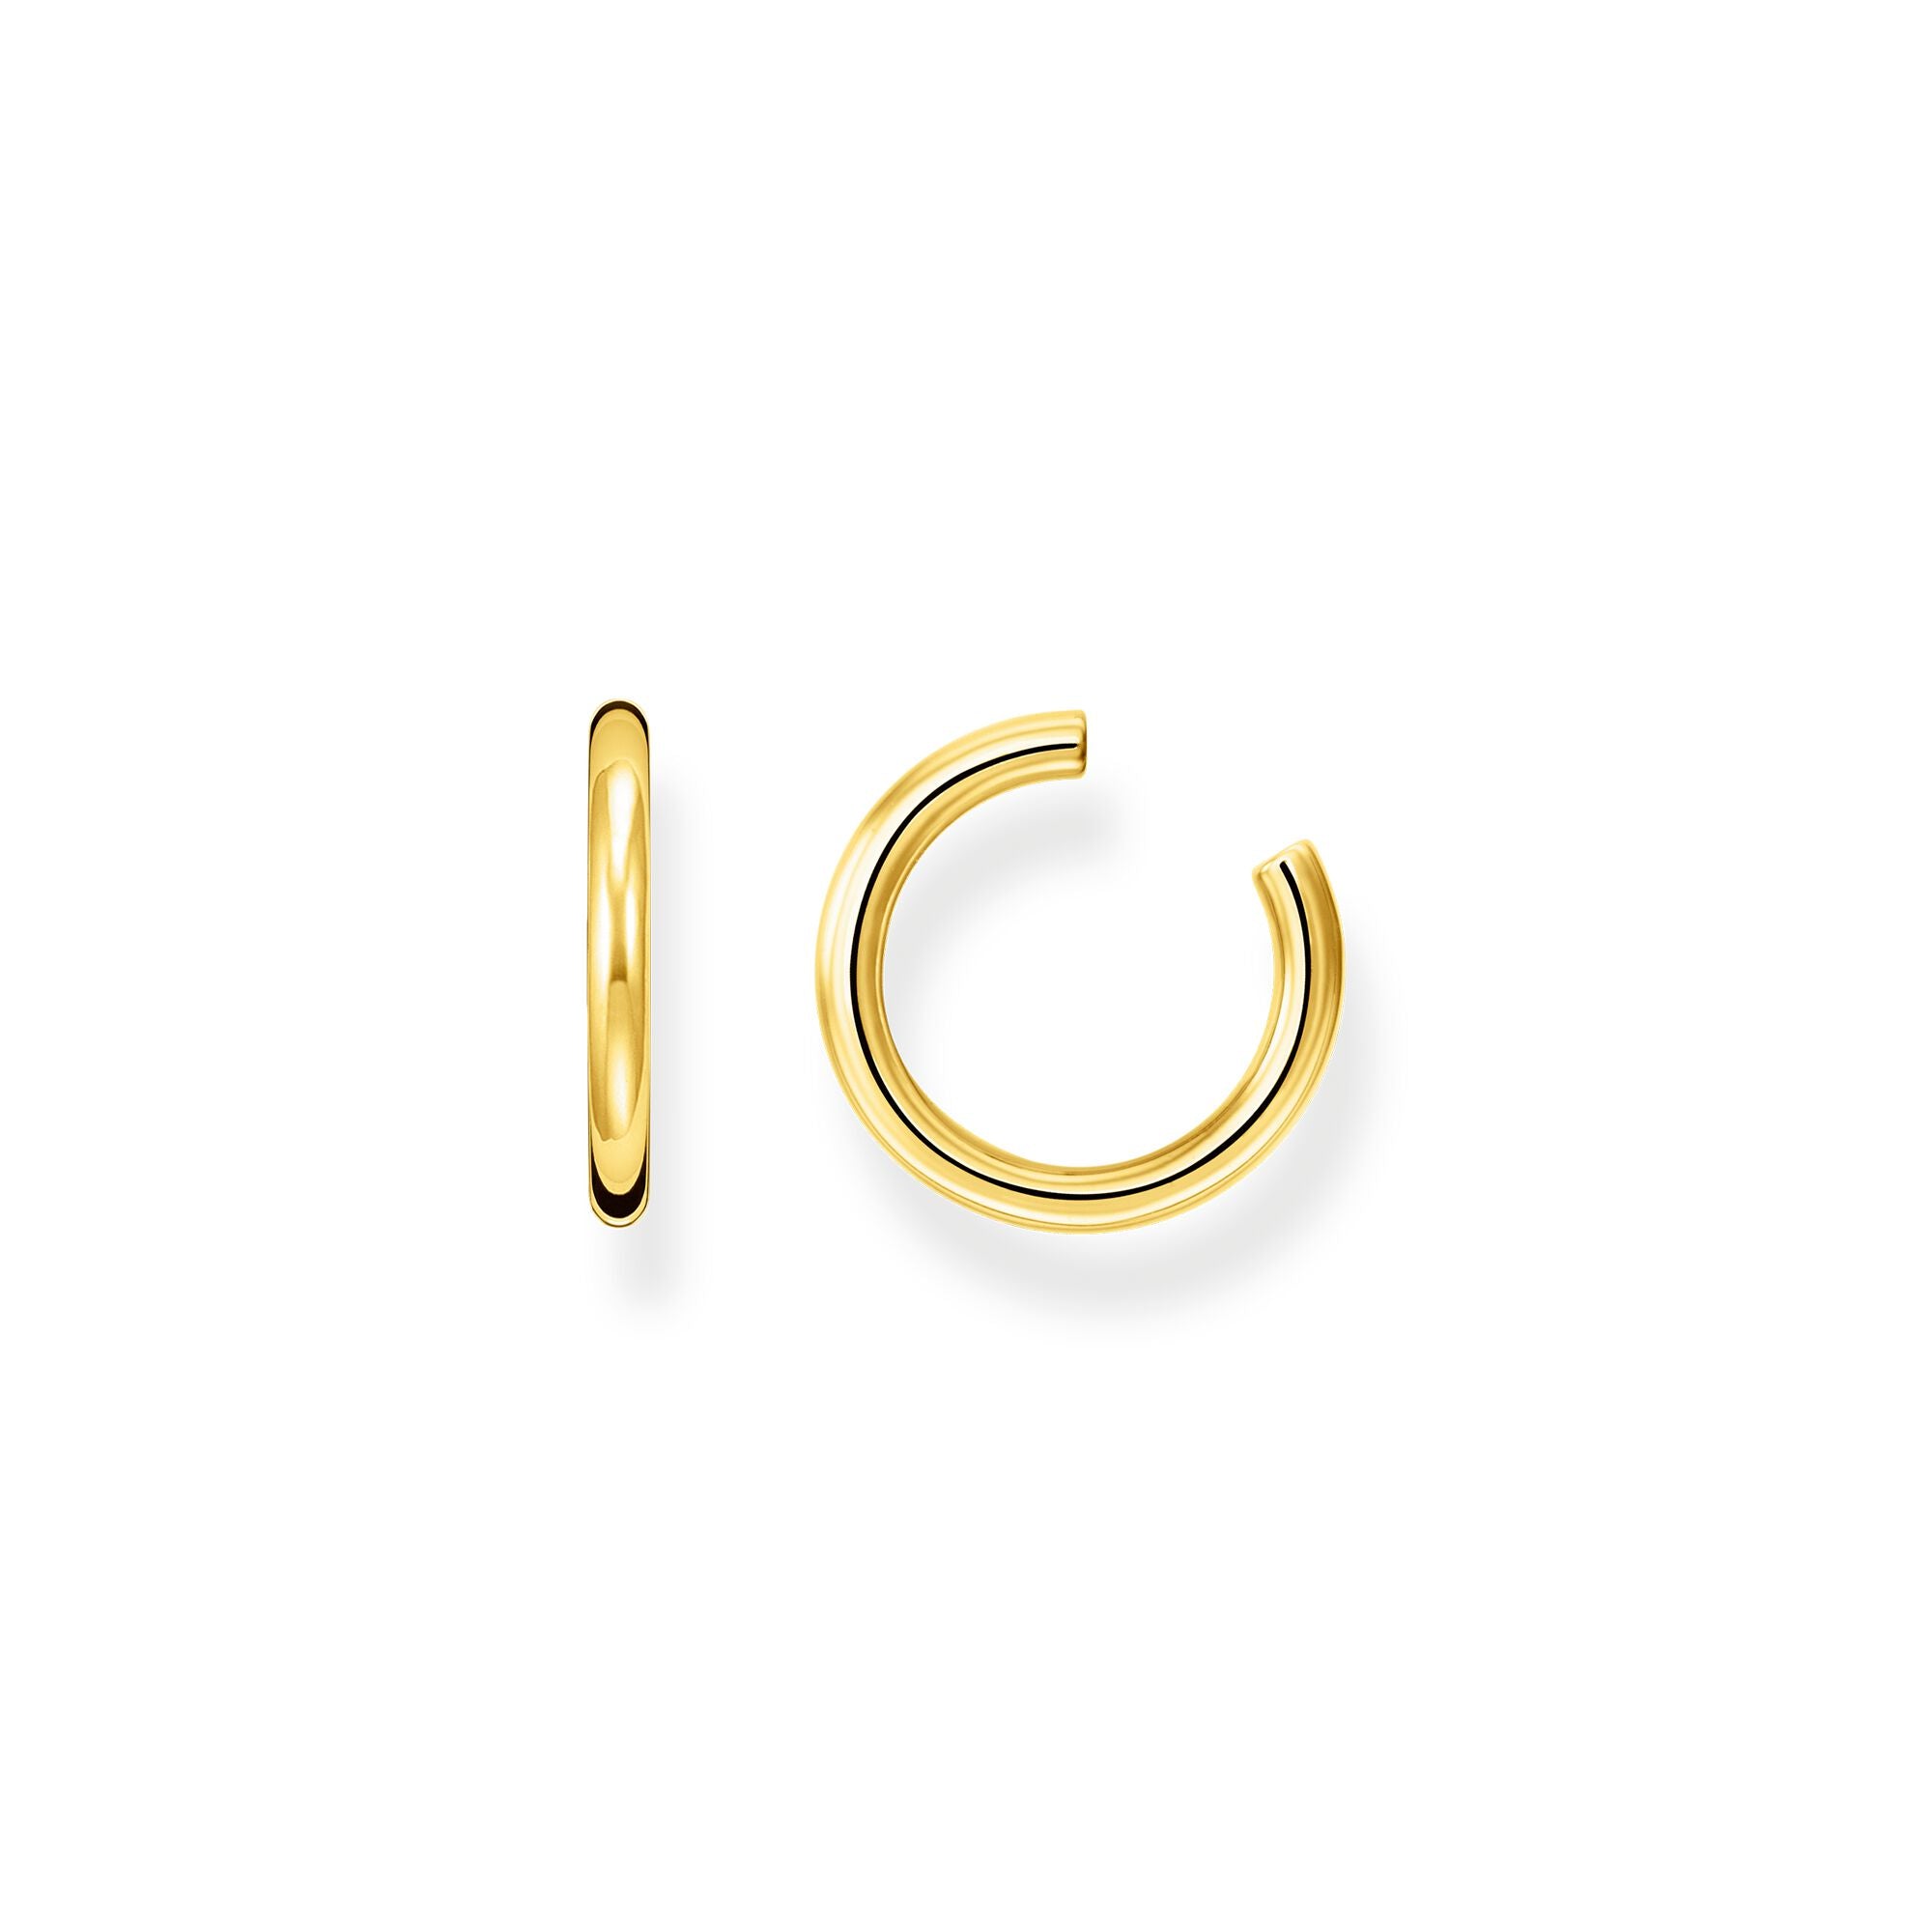 Thomas Sabo 18 karat yellow gold plated sterling silver plain ear cuff for non pierced ears.  Comes as a single earring